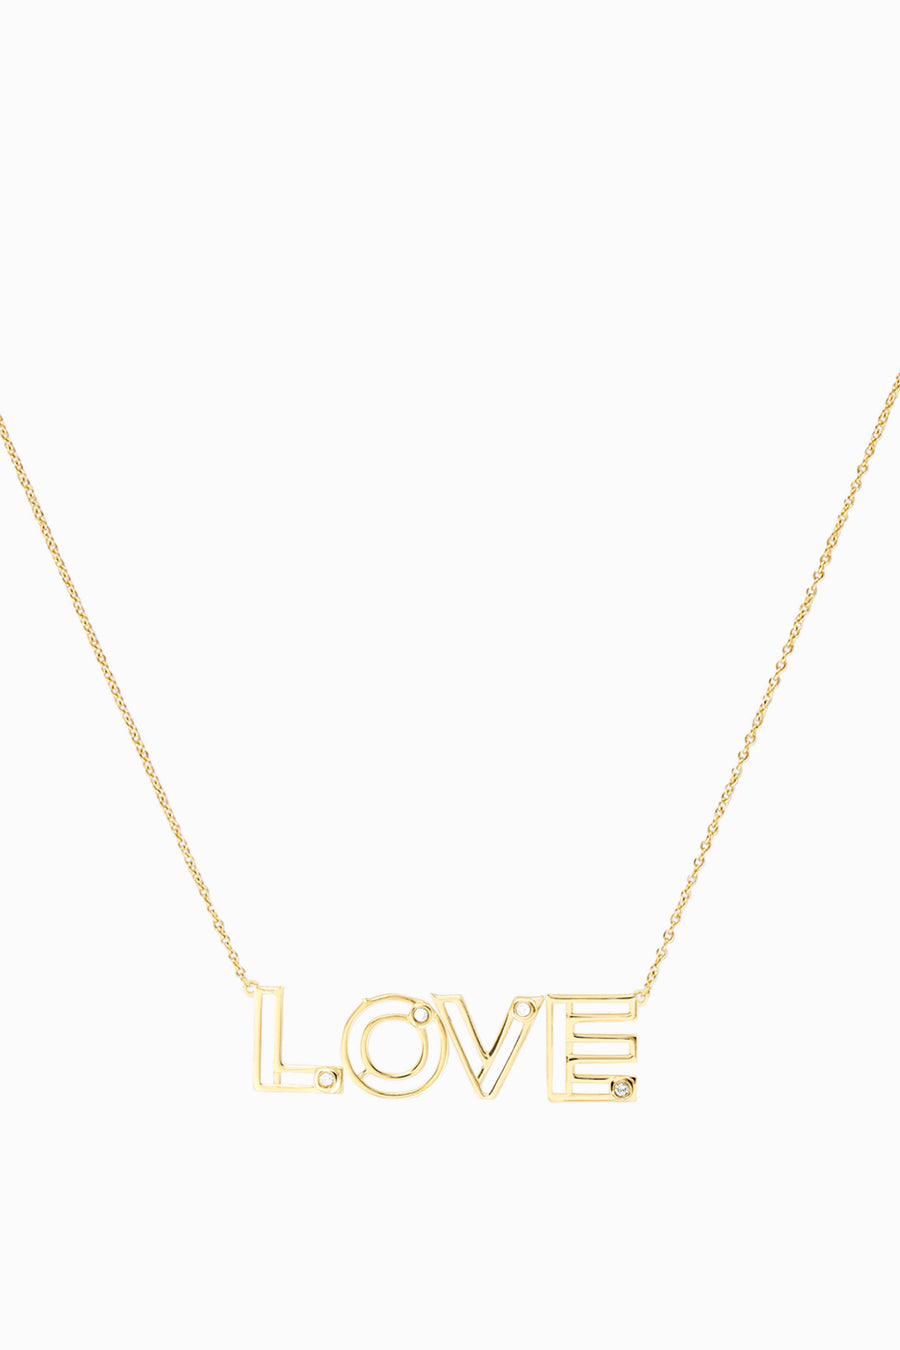 Covet Custom Word Necklace - 4 Letters